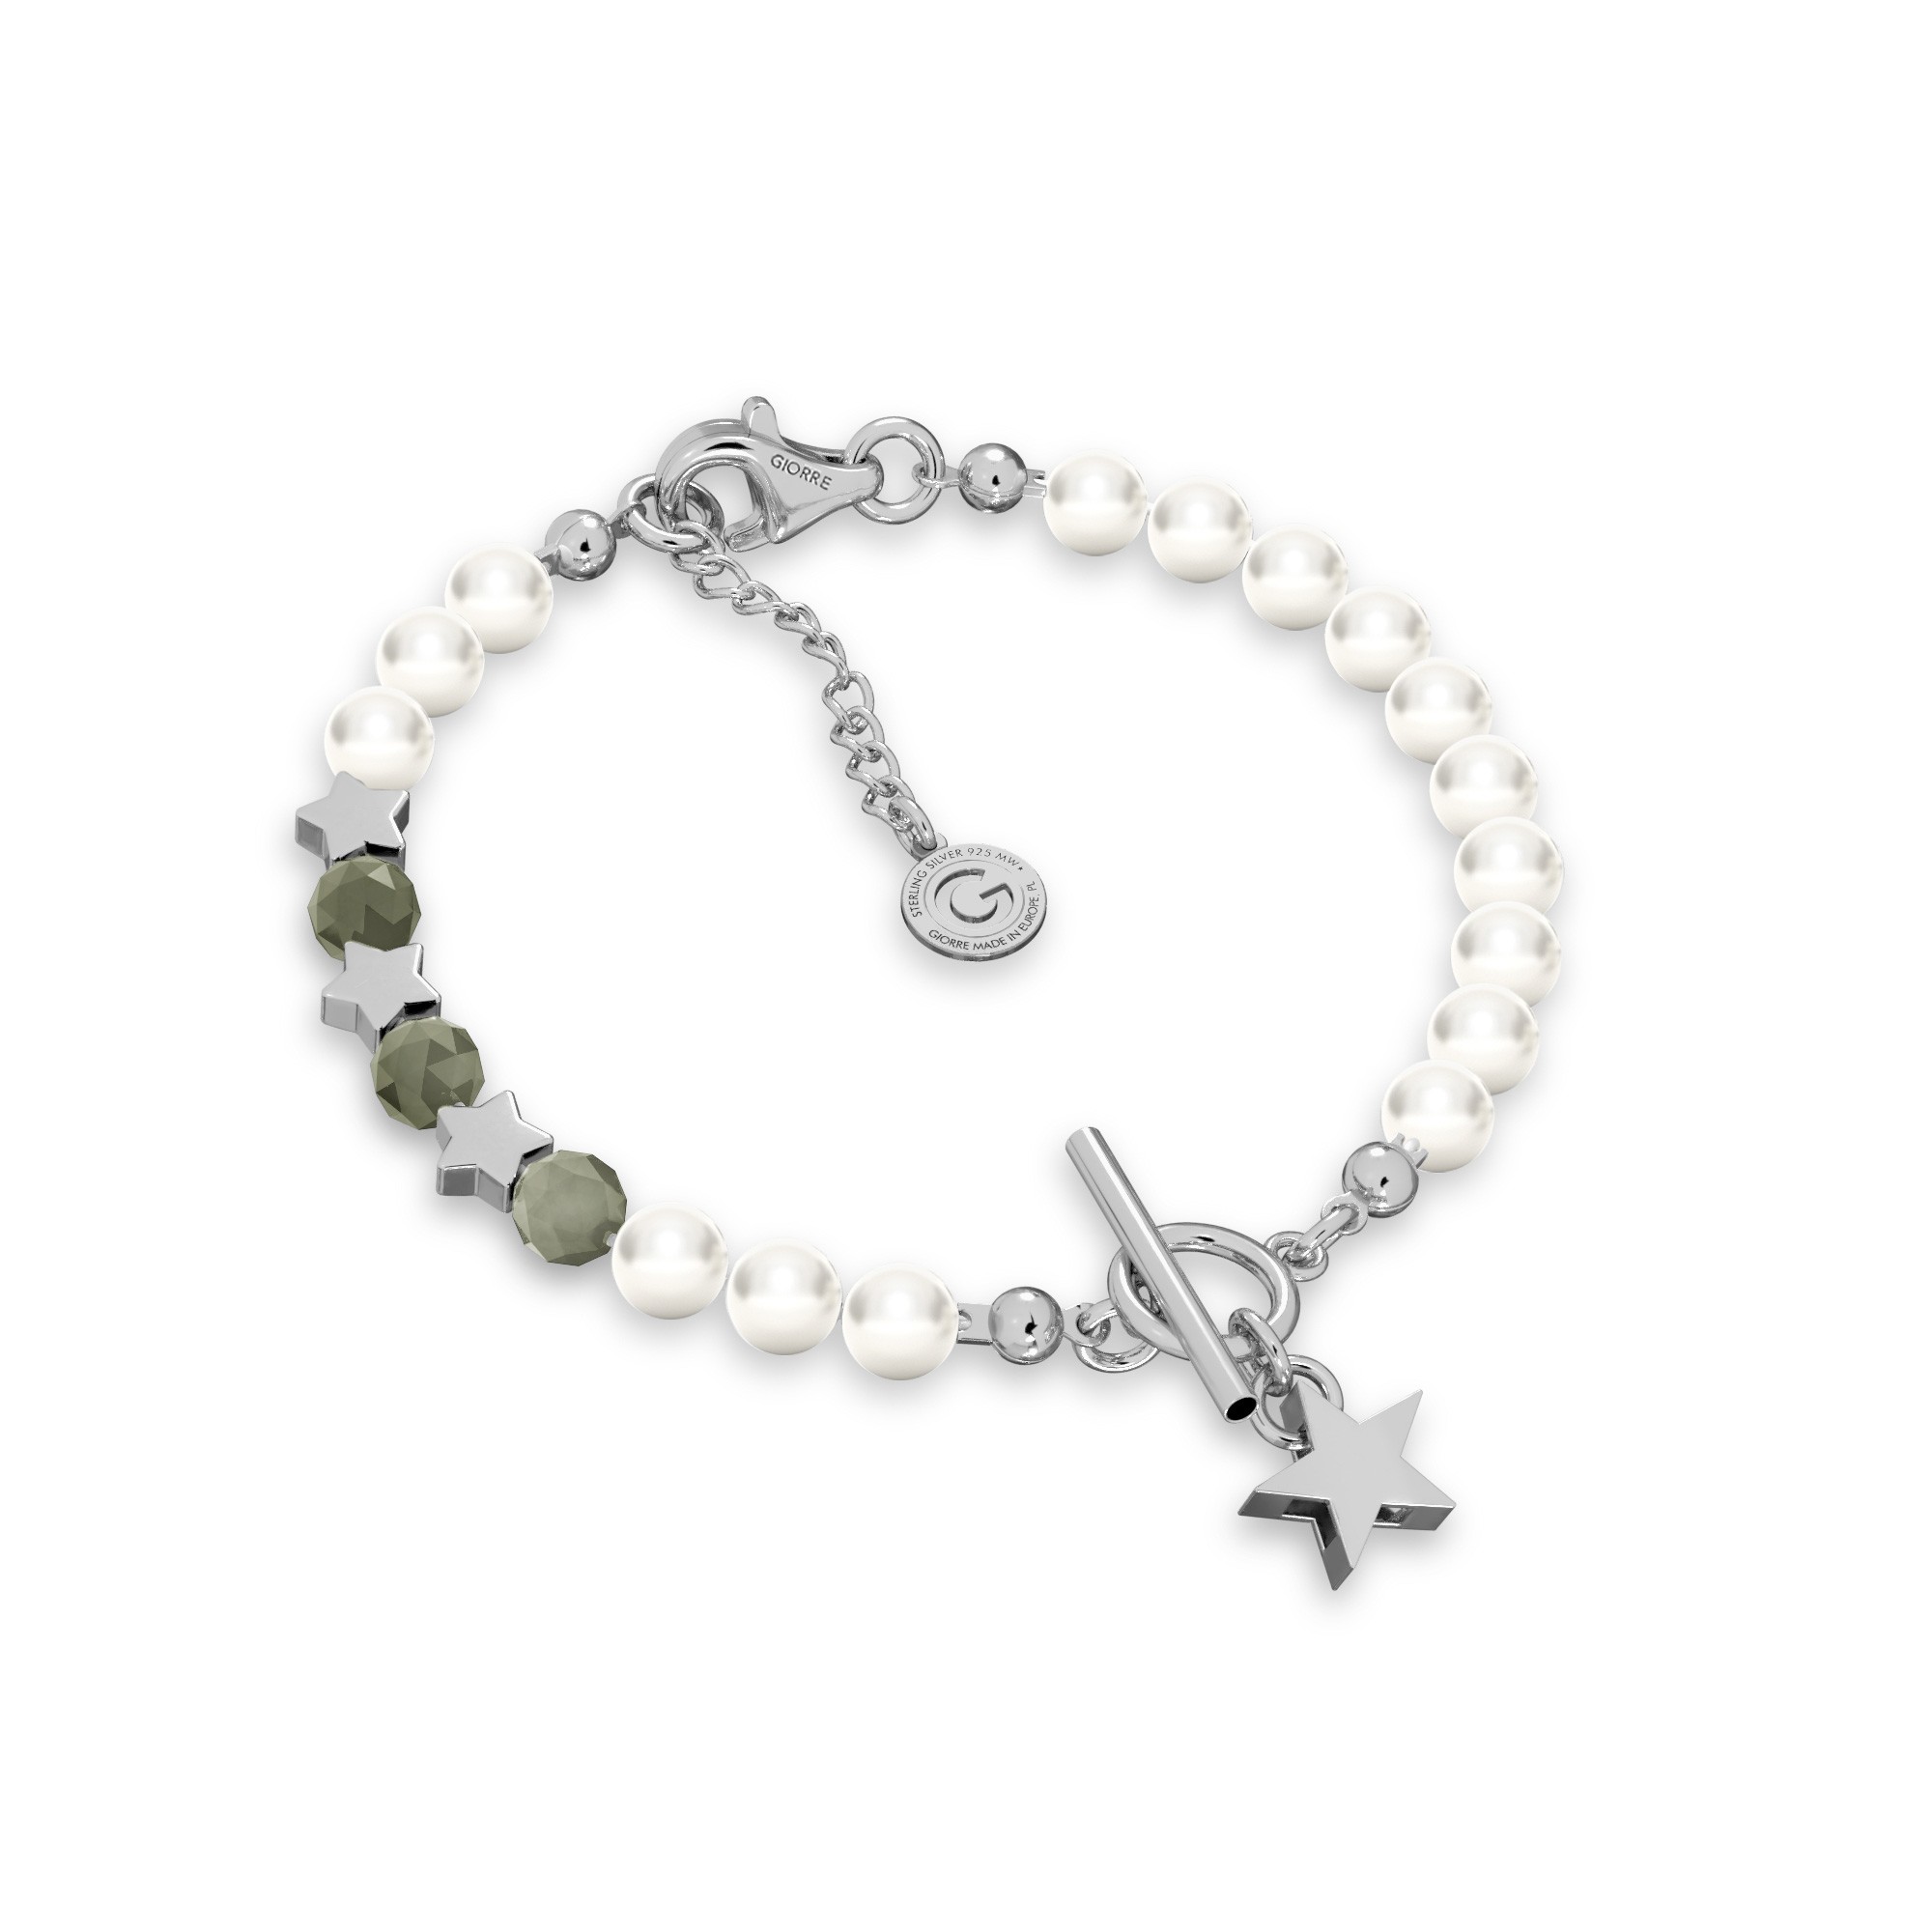 Emerald pearl bracelet with stars, sterling silver 925